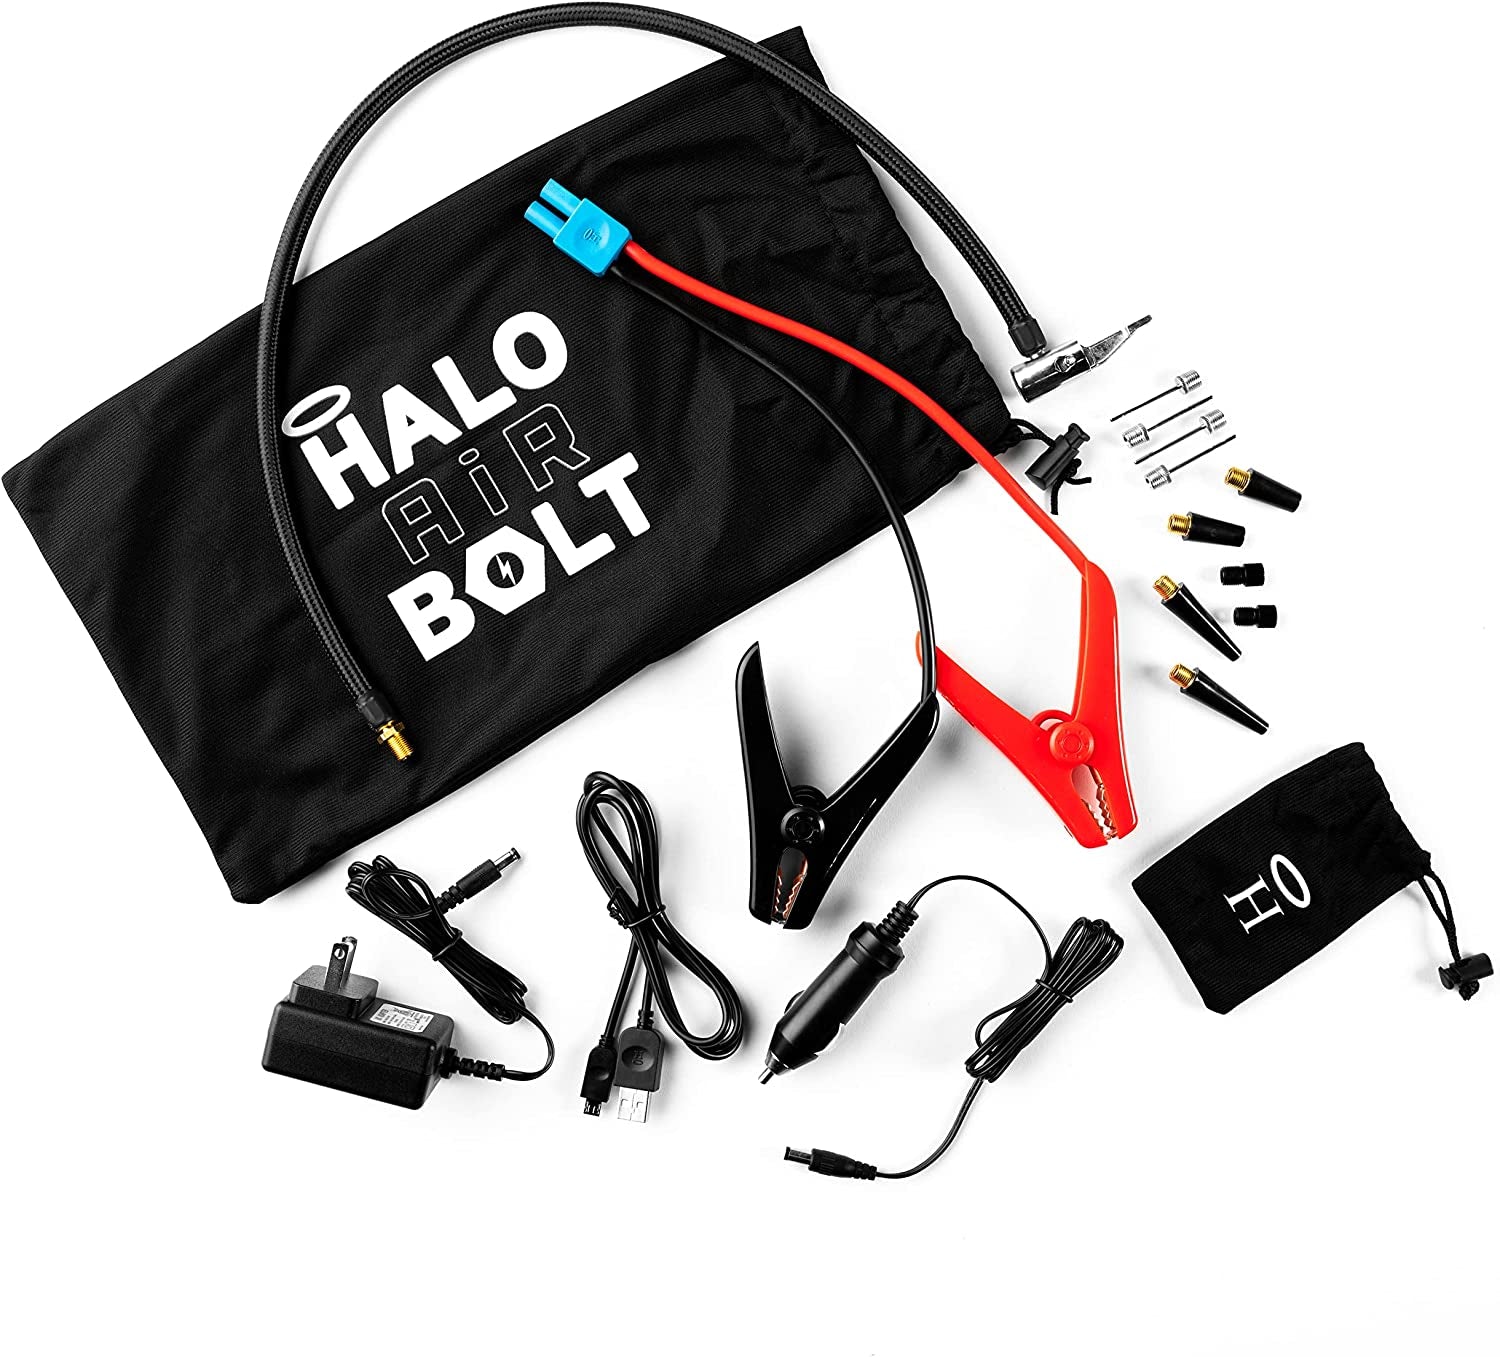 Bolt Air 58830 Mwh Portable Emergency Power Kit with Tire Pump, 4 Interchangeable Air Nozzles, Extra Accessory Kit, Car Jump Starter, and Car Charger - Black Graphite